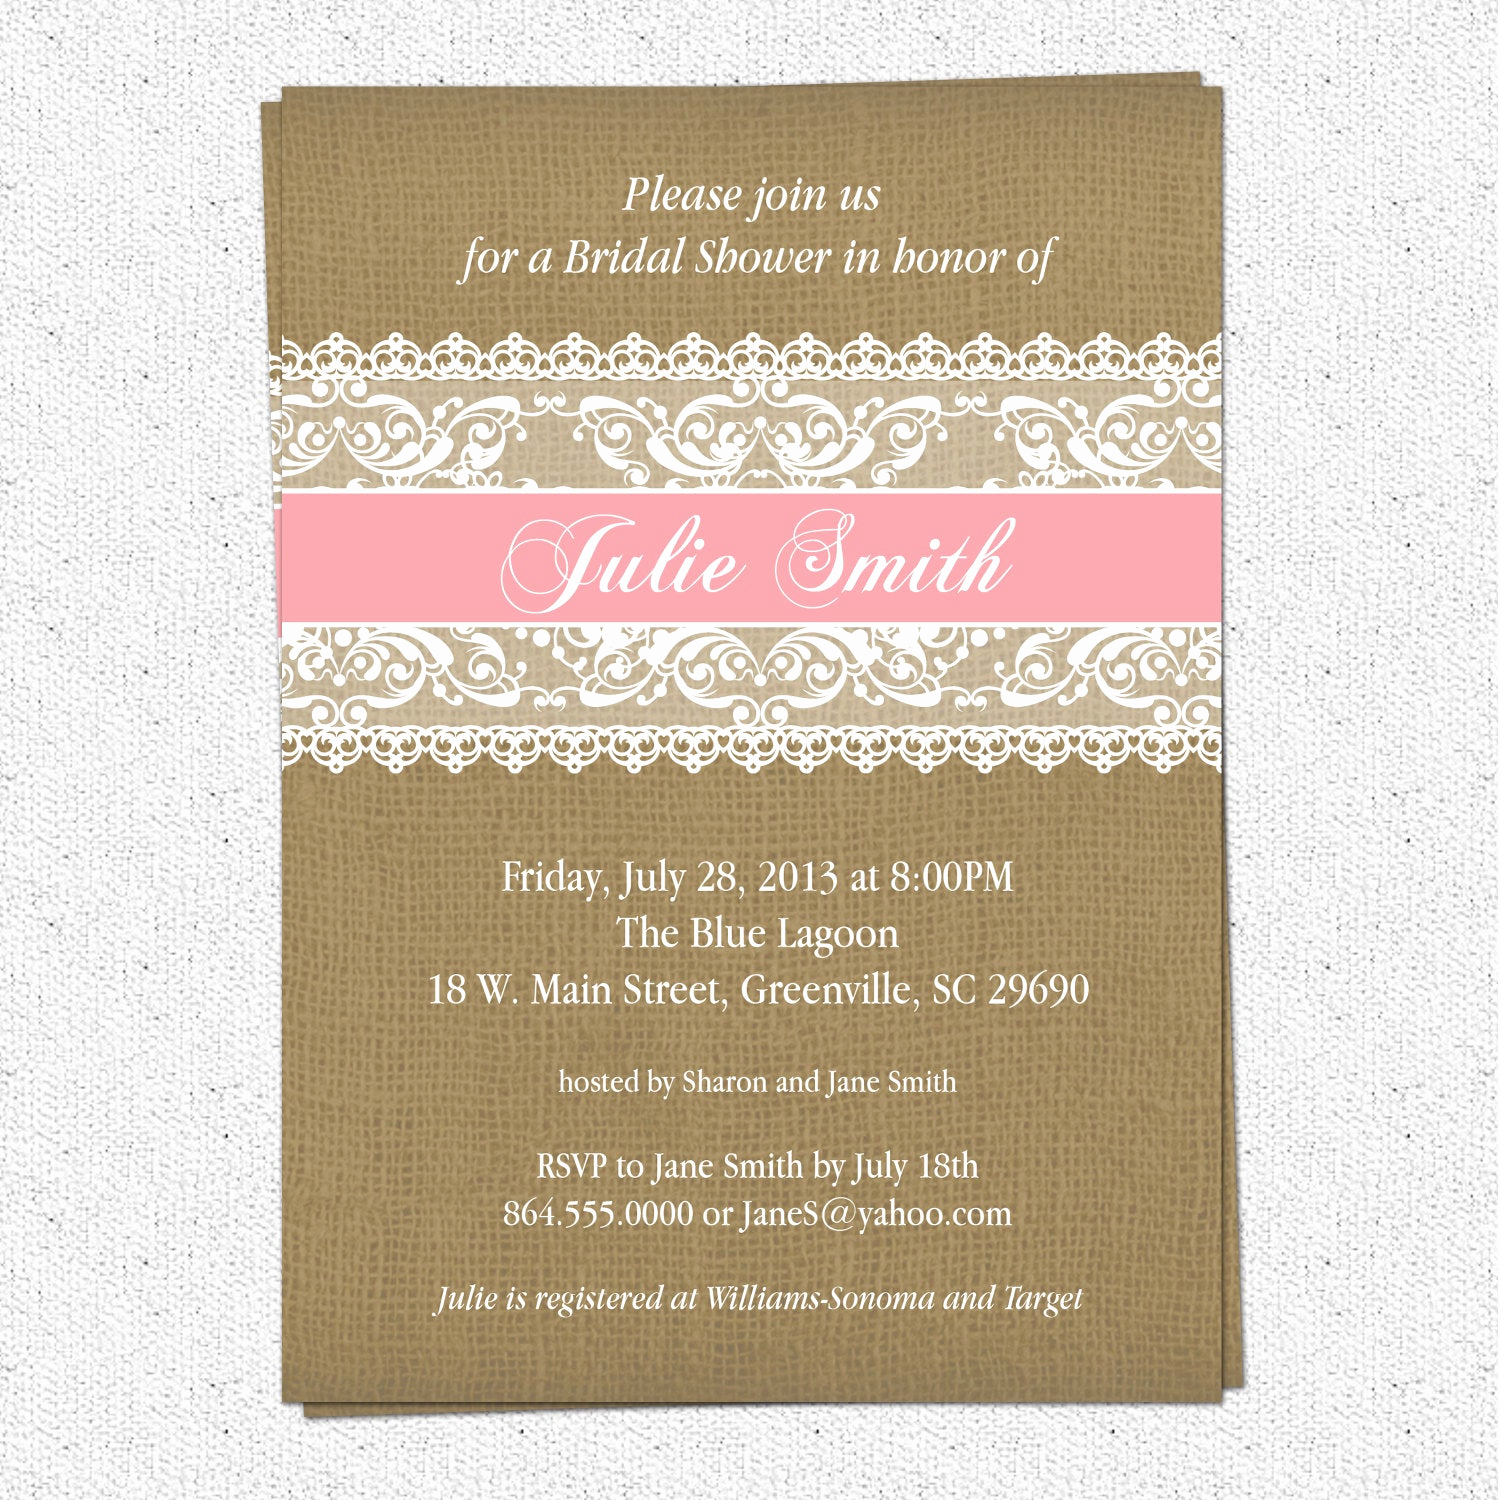 Post Wedding Shower Invitation Wording Luxury Burlap and Lace Bridal Shower Invitation Rustic Pick Your